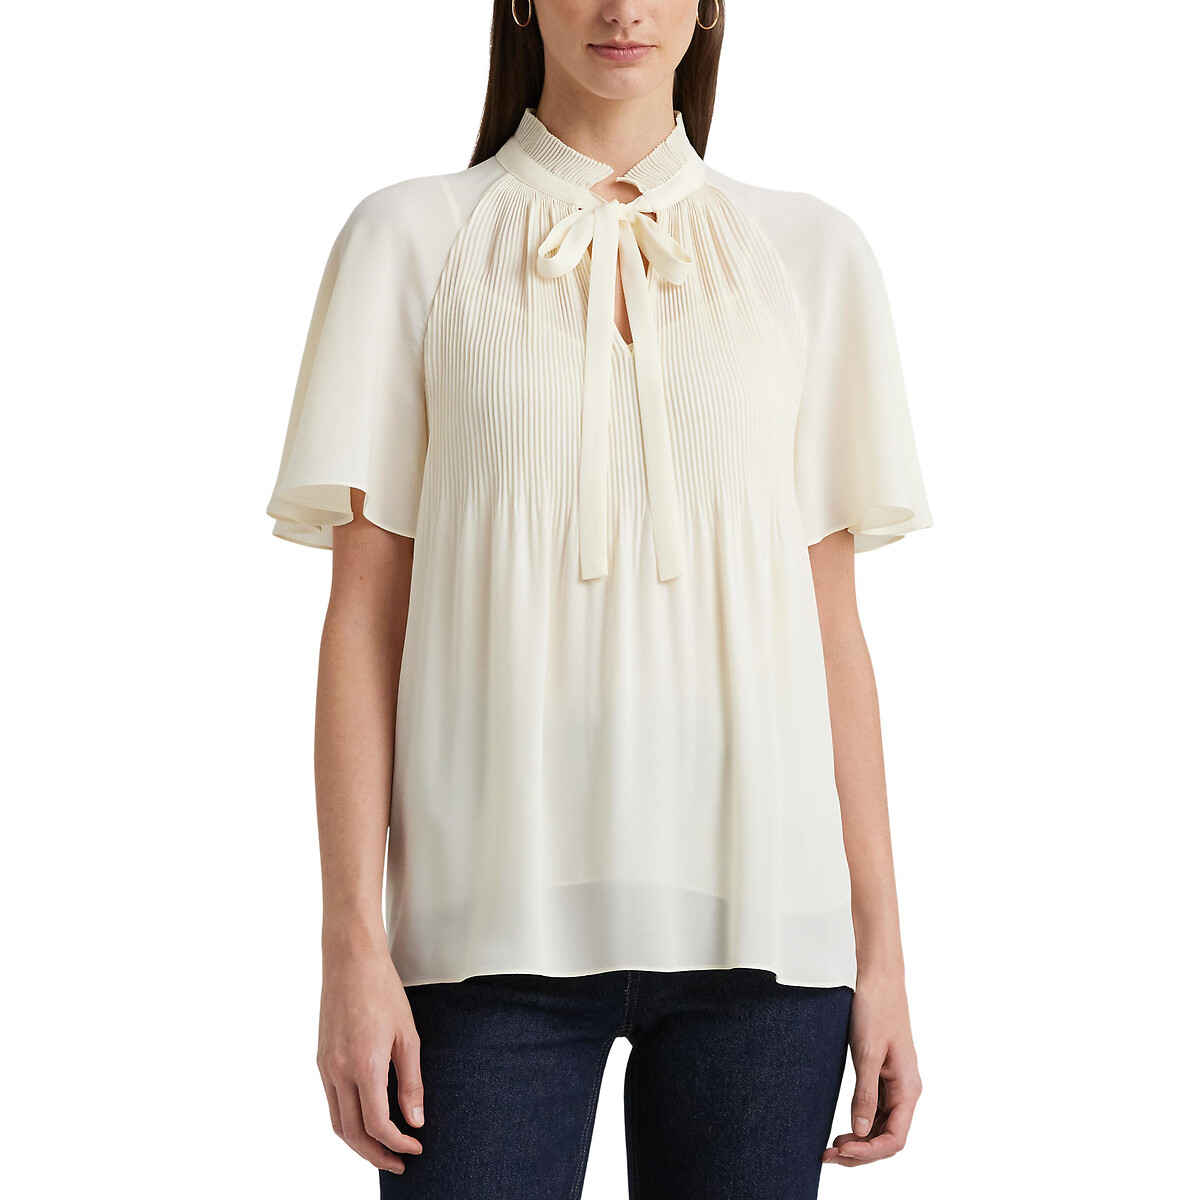 Adar Pussy Bow Blouse with Short Sleeves